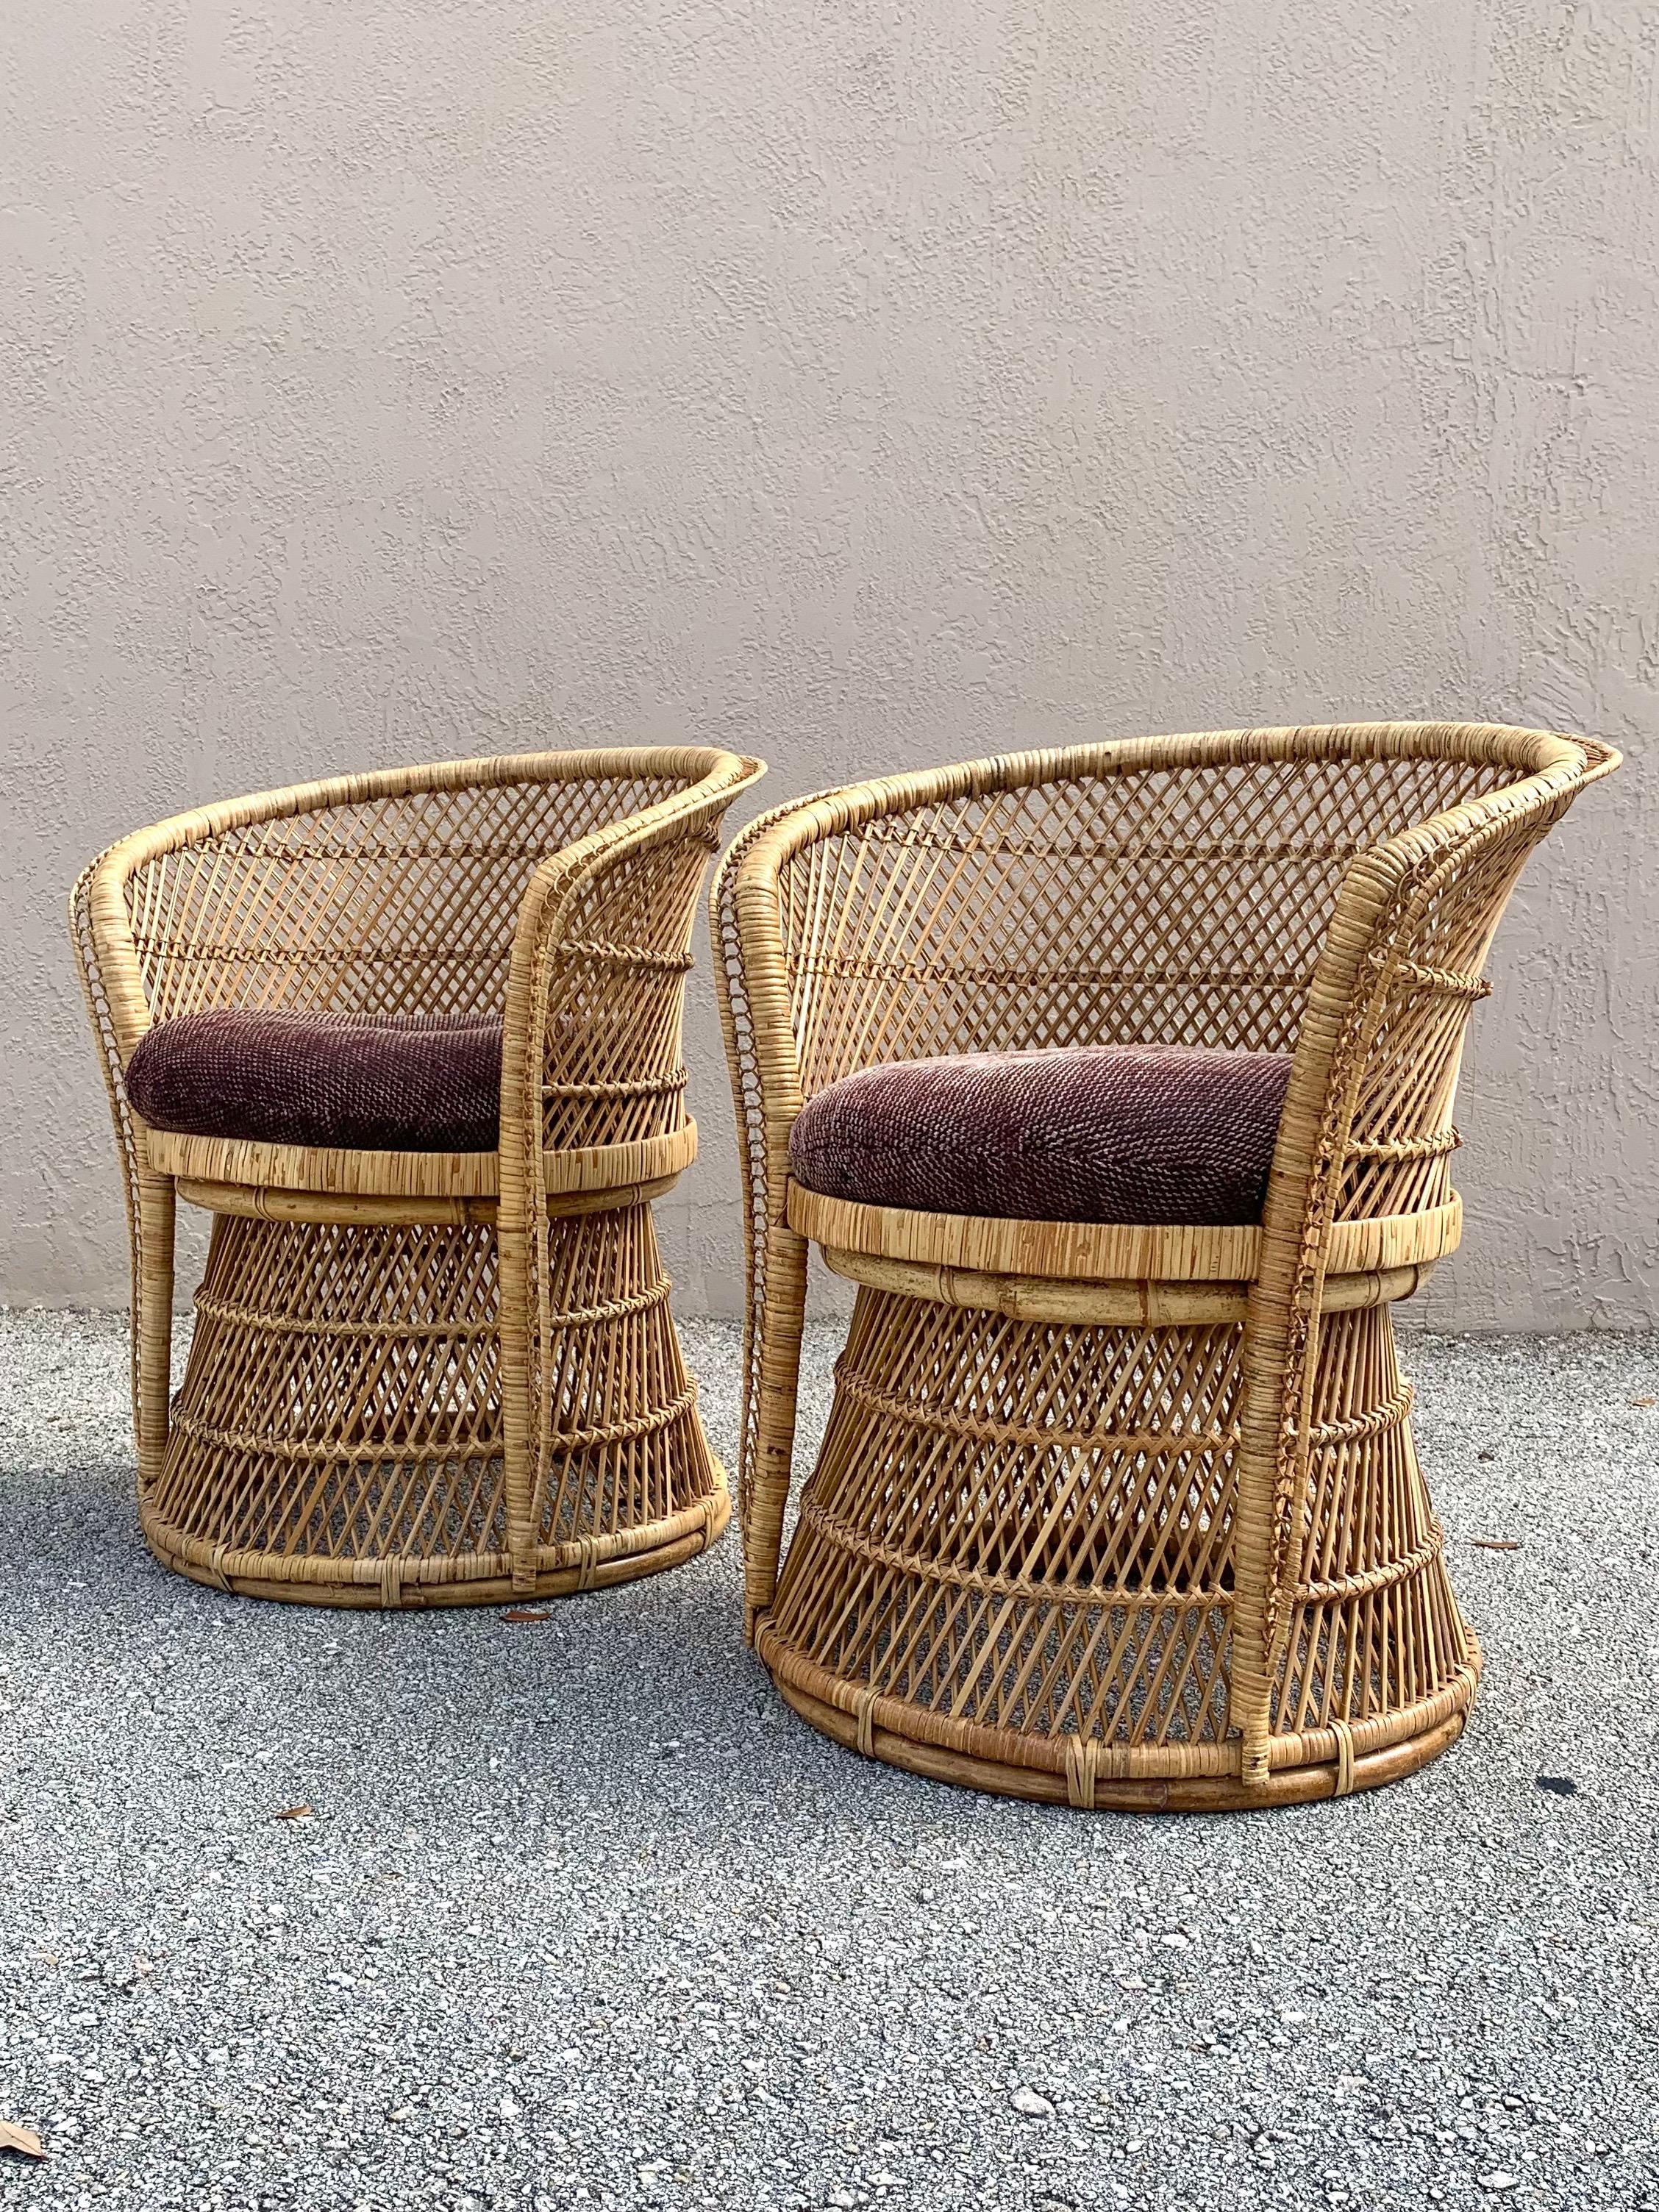 Woven cane arm chairs. After the Spanish Emmanuelle style. Beautifully made with tons of personality. 

Structurally strong with original cushions. 

Would fit well in boho, Mid-Century Modern, and naturally designed rooms,.